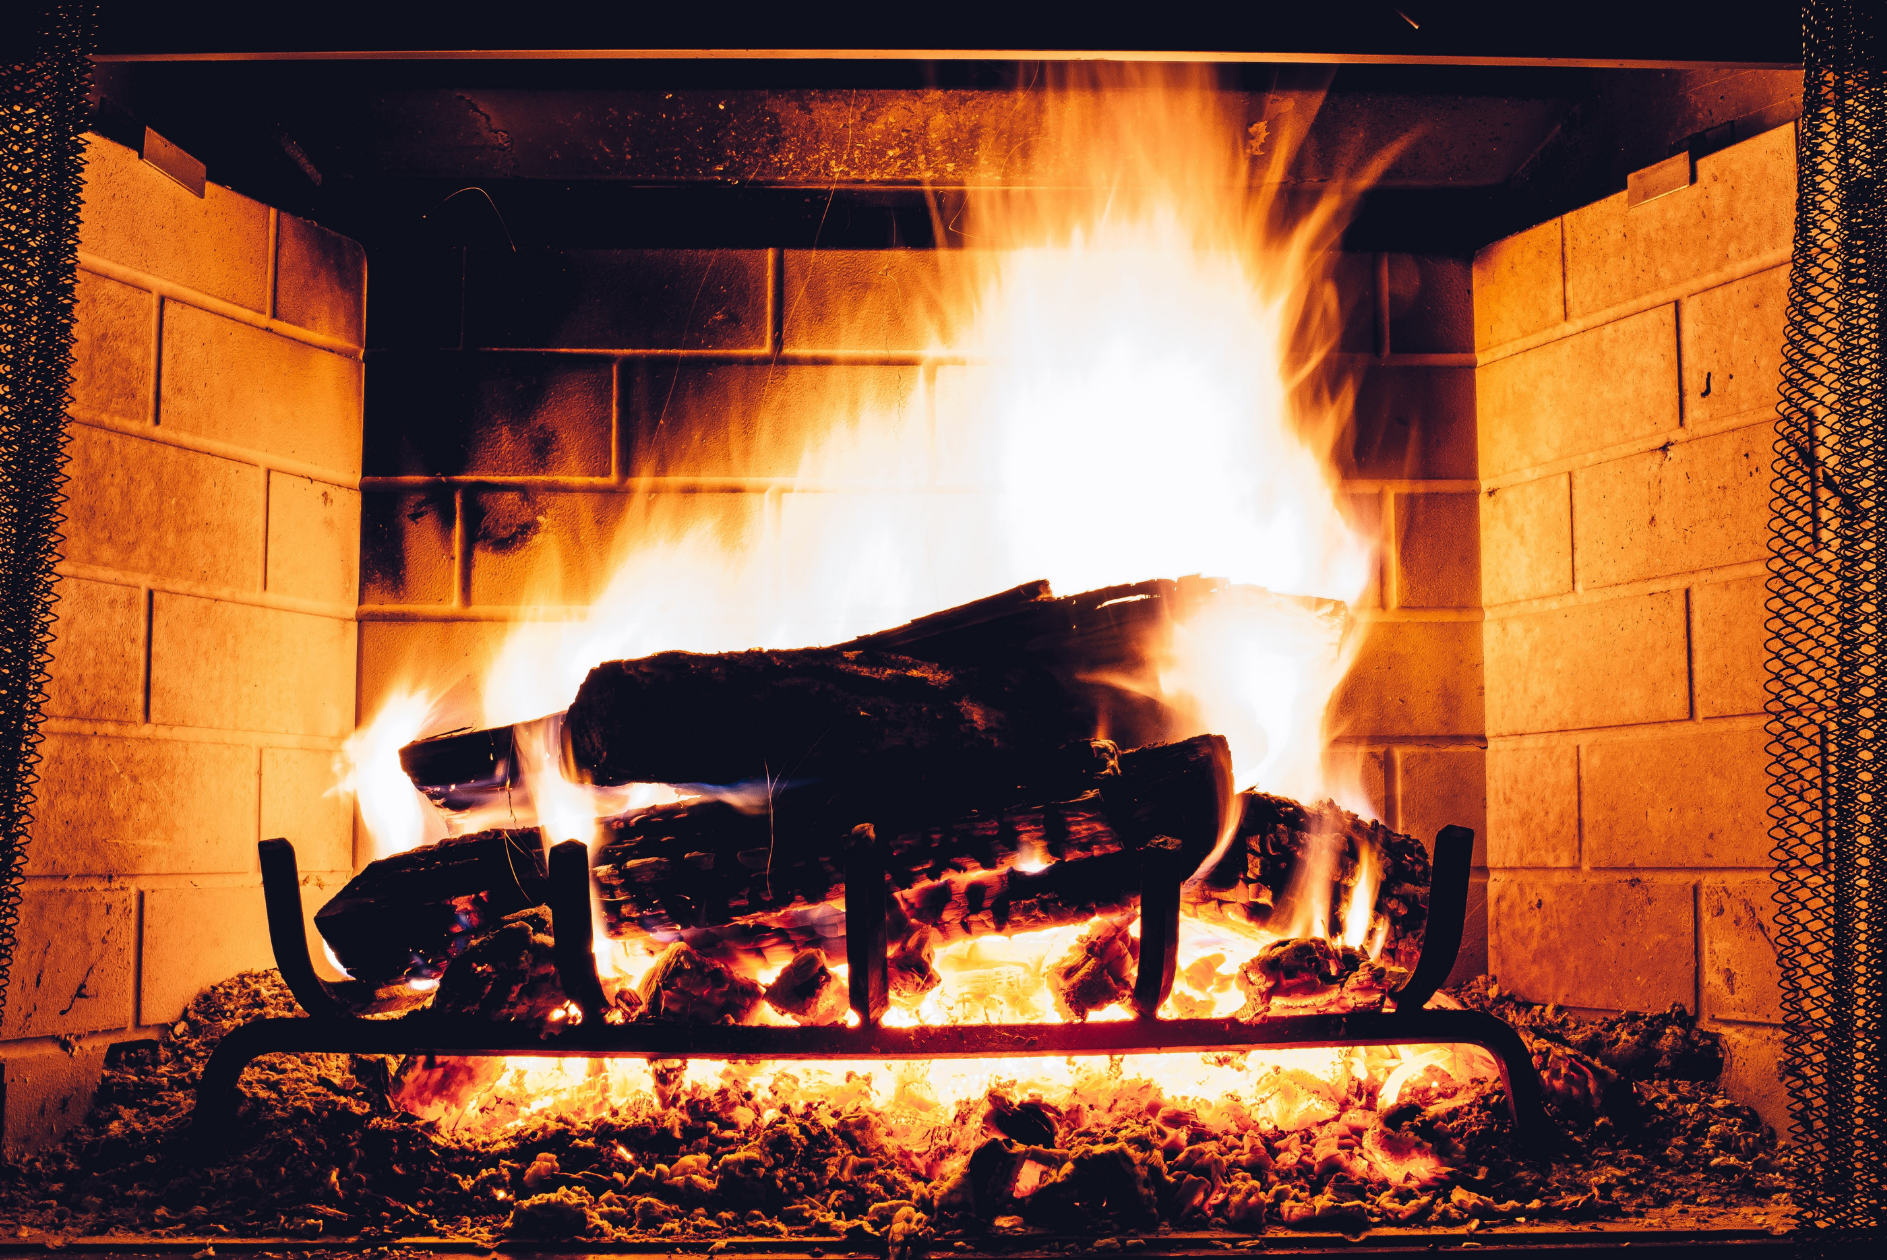 winter fire safety tips - Boston Moms